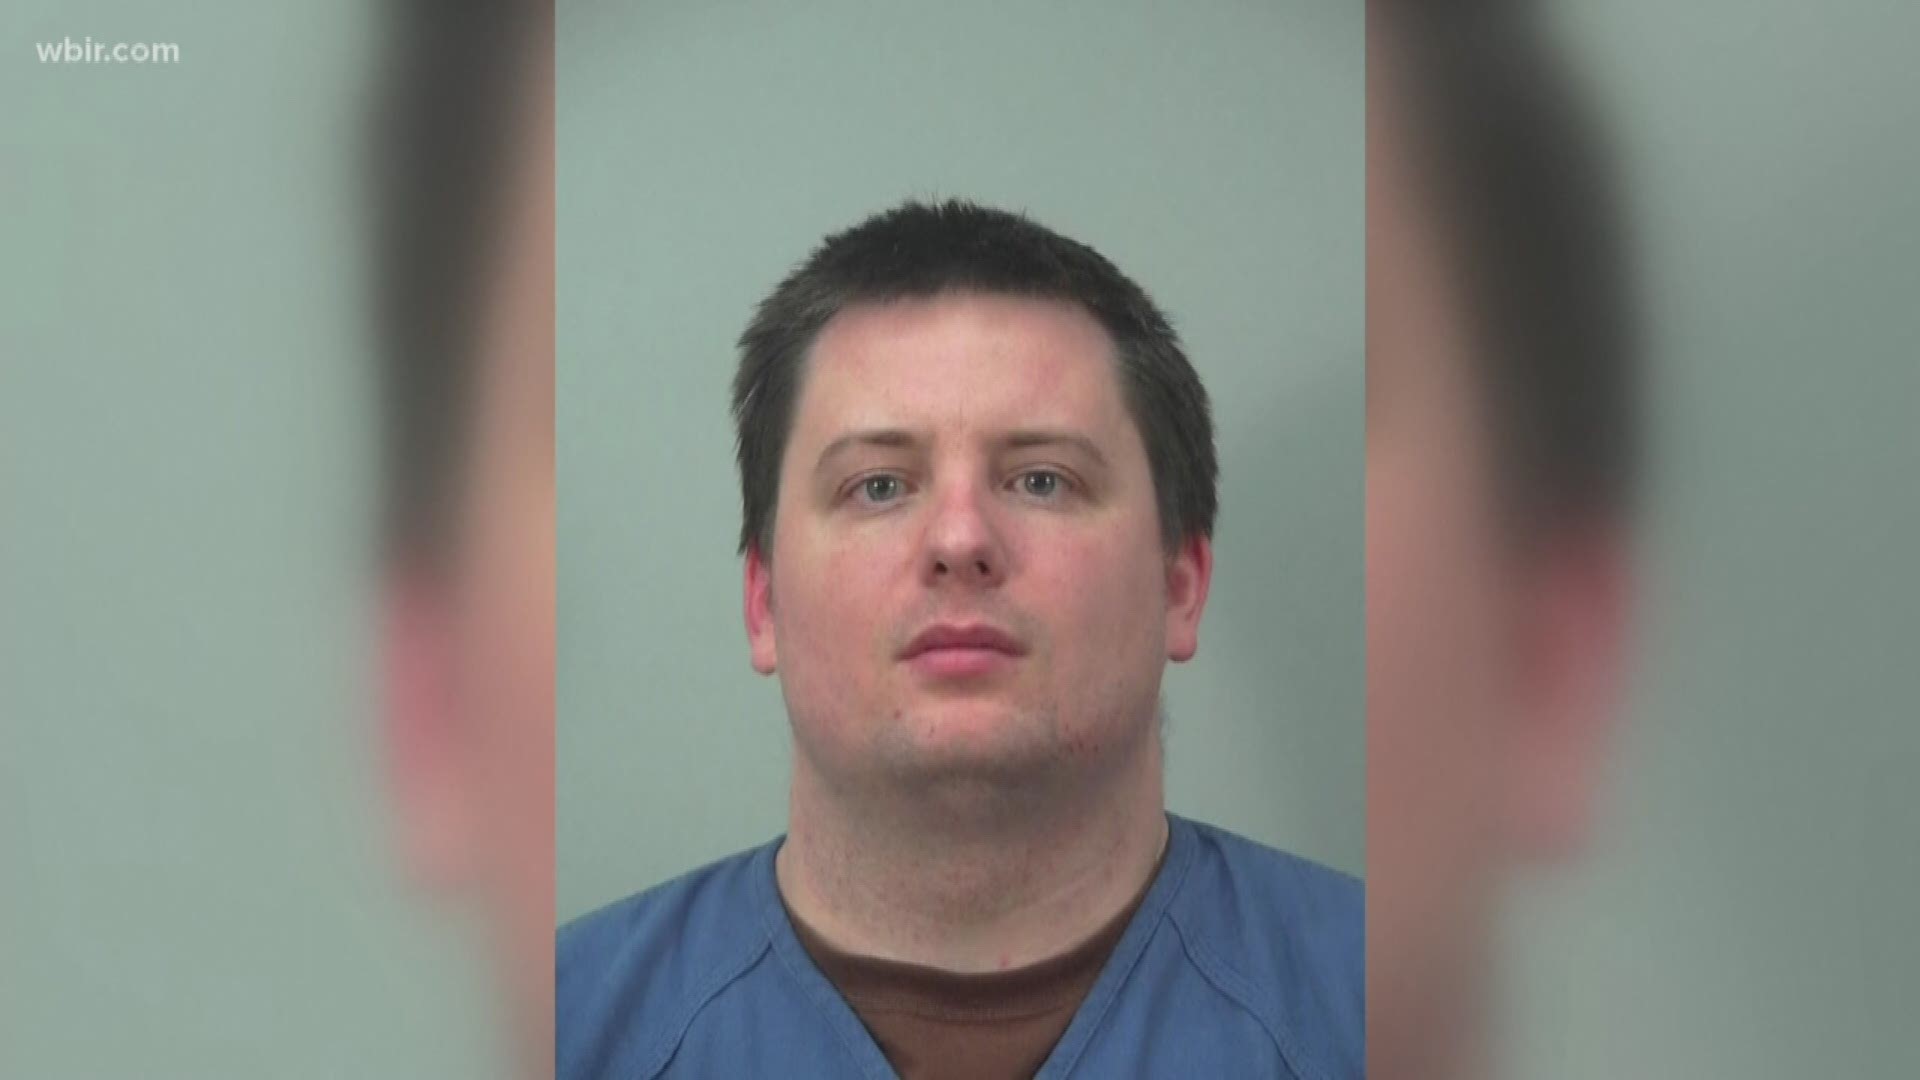 Court documents say a grand jury in Wisconsin indicted Rogers on production of child pornography and making a false statement.